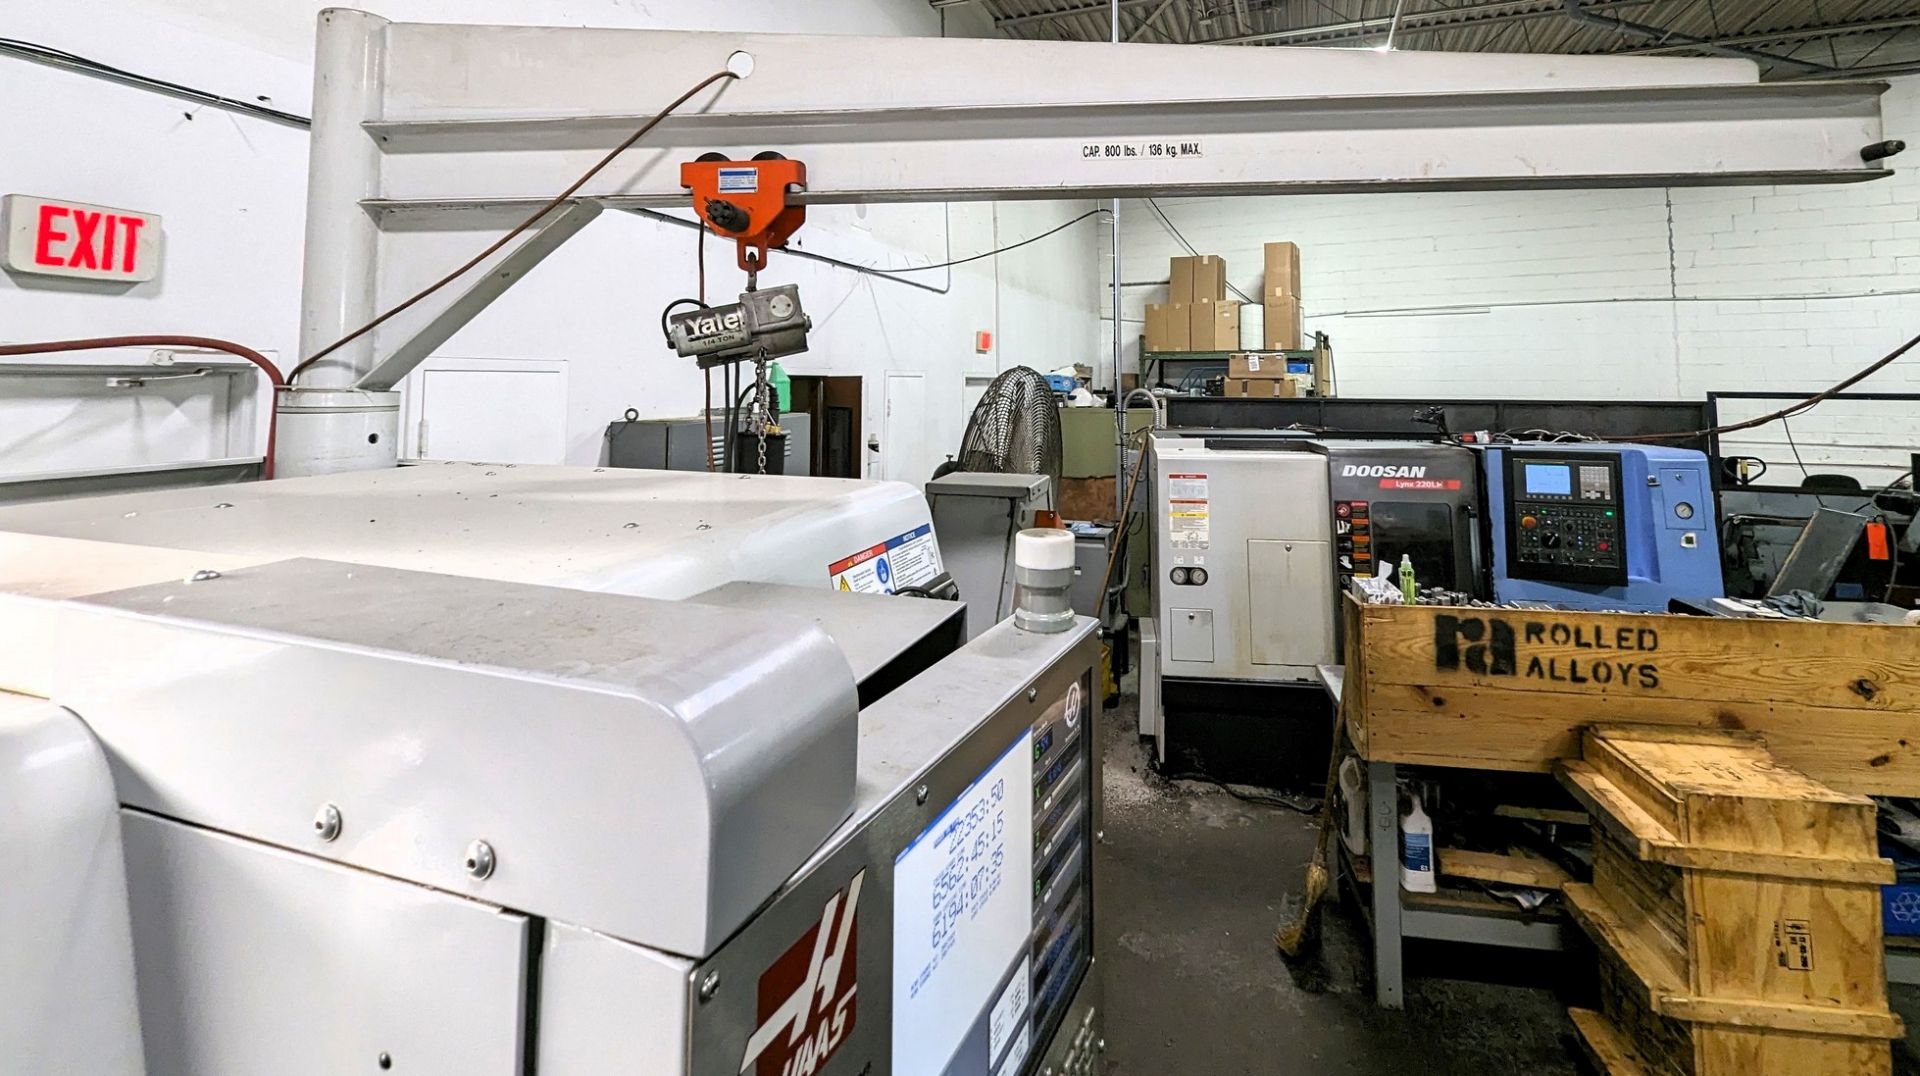 2008 HAAS SL-30TB CNC TURNING CENTER, CNC CONTROL, 15” CHUCK, BIG BORE, TAILSTOCK, TOOL SETTER, CHIP - Image 12 of 14